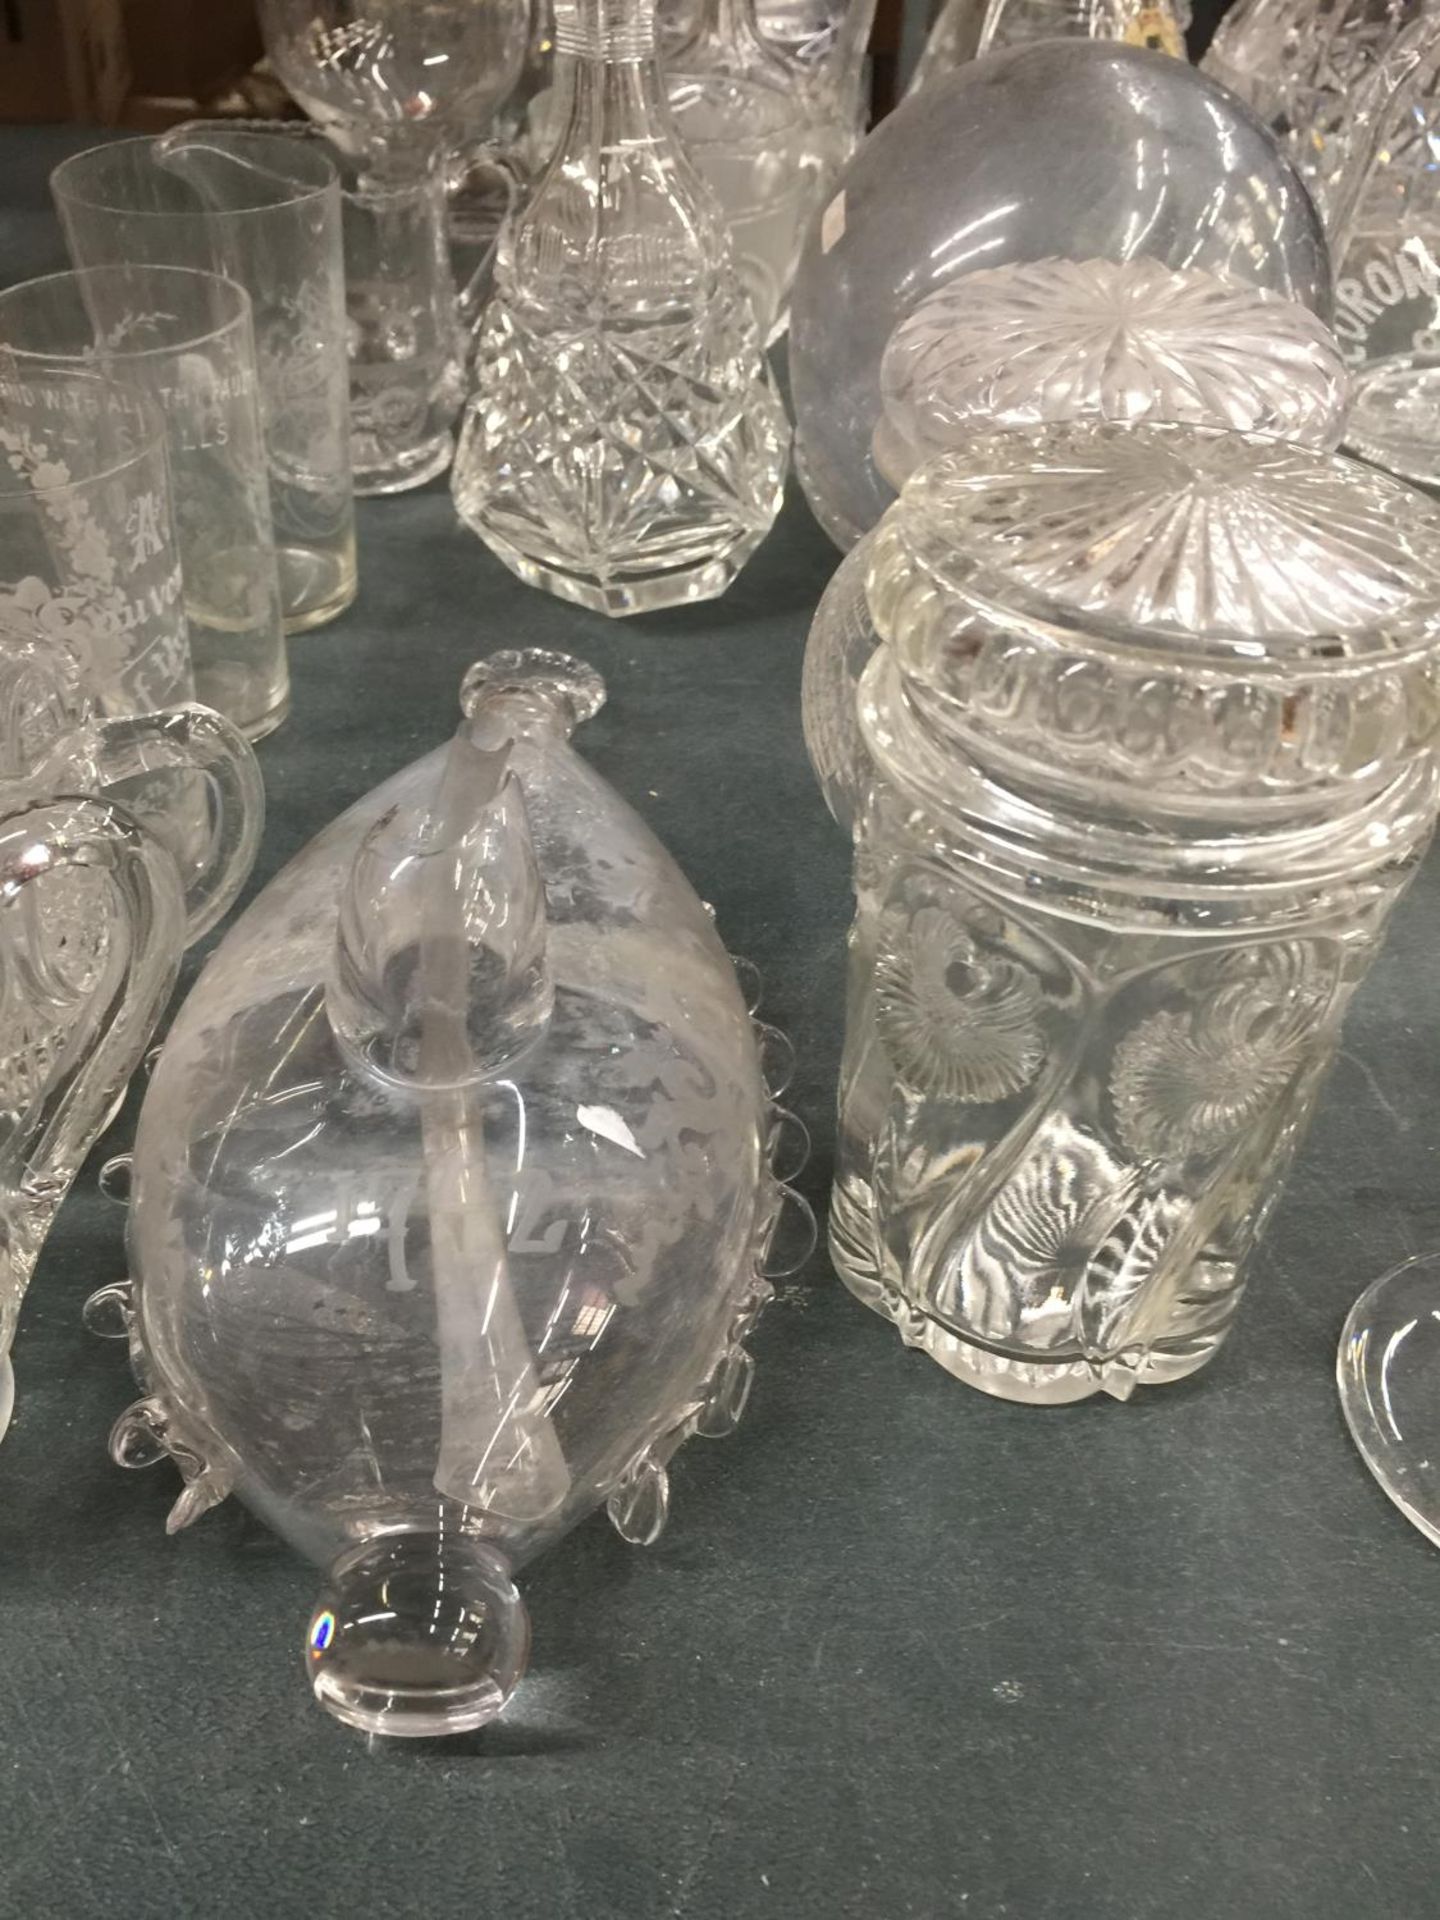 A QUANTITY OF GLASSWARE TO INCLUDE A 19TH CENTURY GLASS BAROMETER - A/F, JUGS, DISHES ETC - Image 5 of 6